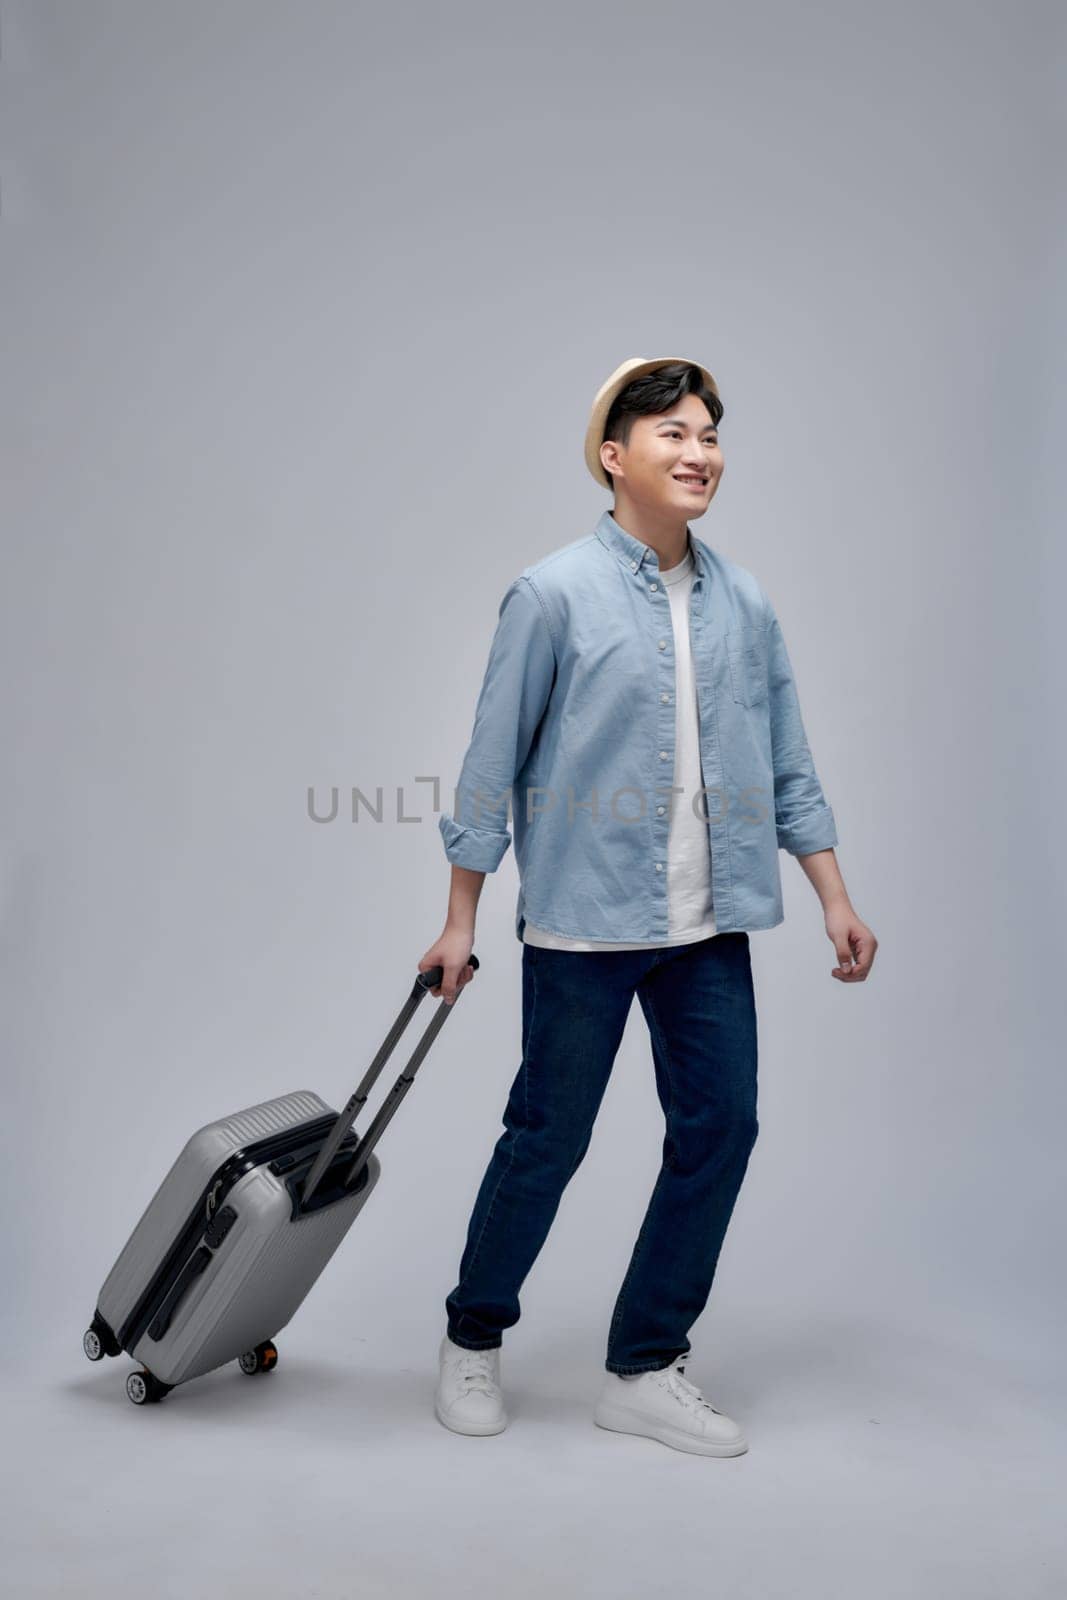 Male tourist with suitcase walking going on vacation advertising travel offer by makidotvn